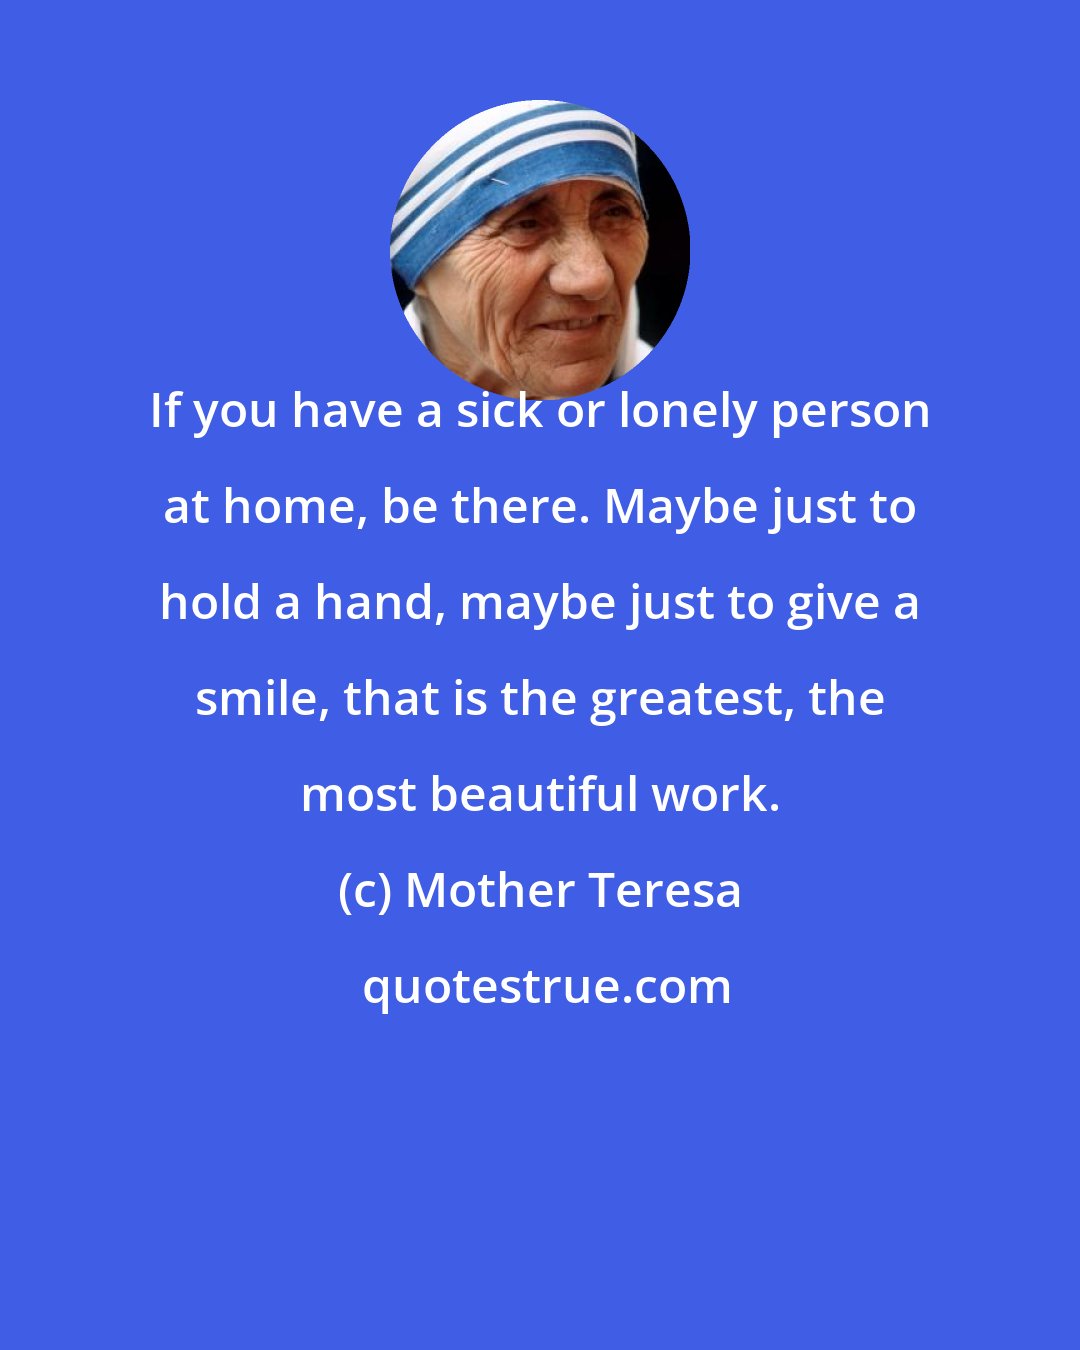 Mother Teresa: If you have a sick or lonely person at home, be there. Maybe just to hold a hand, maybe just to give a smile, that is the greatest, the most beautiful work.